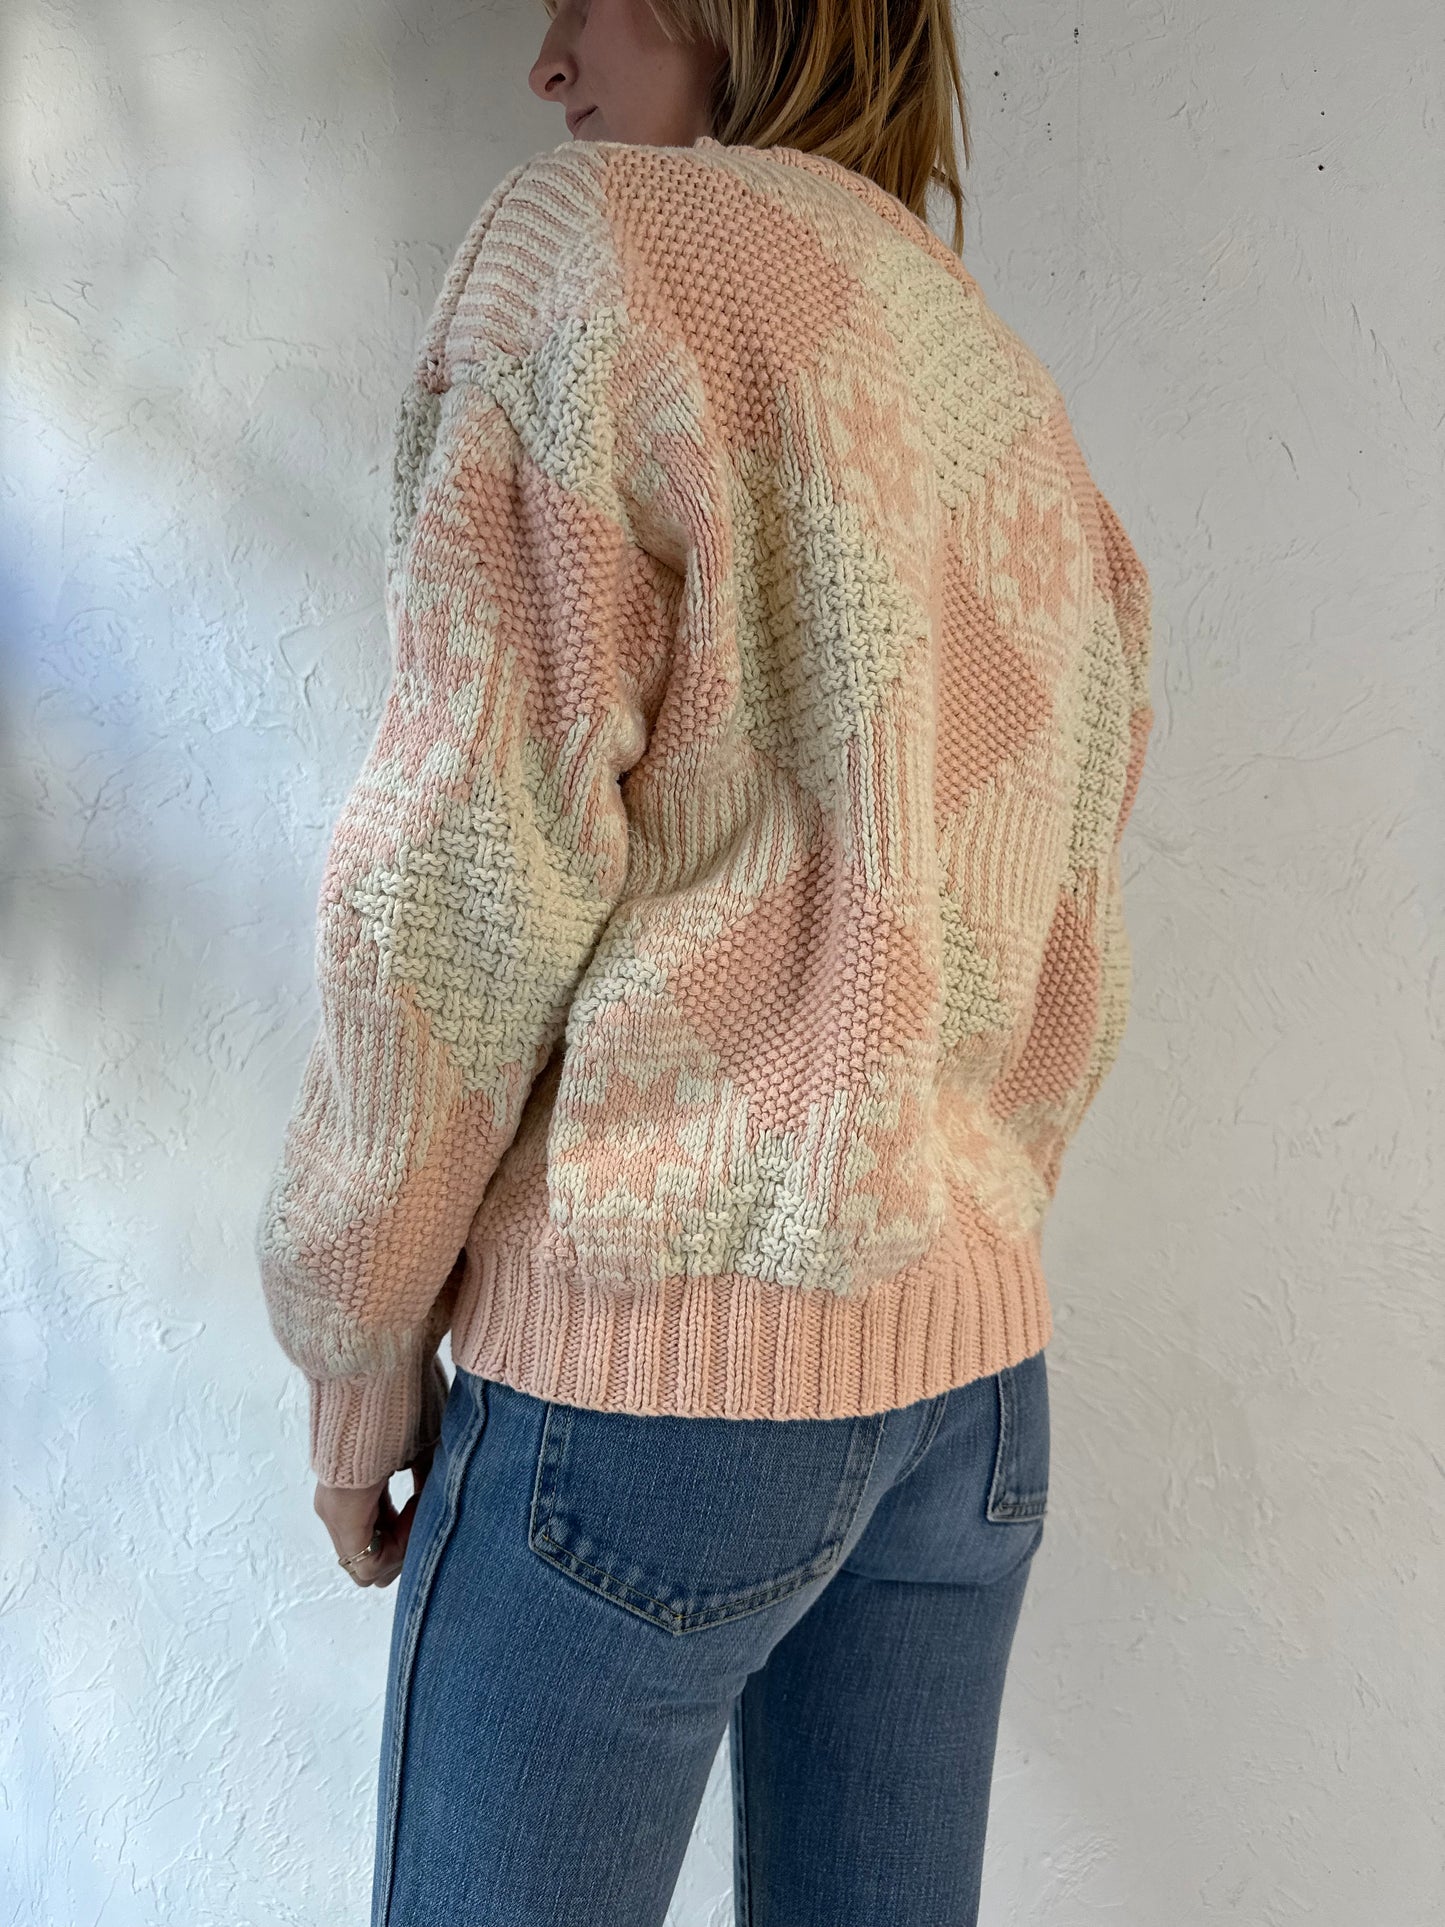 90s 'Canary Island' Thick Cotton Knit Pullover Sweater / Large